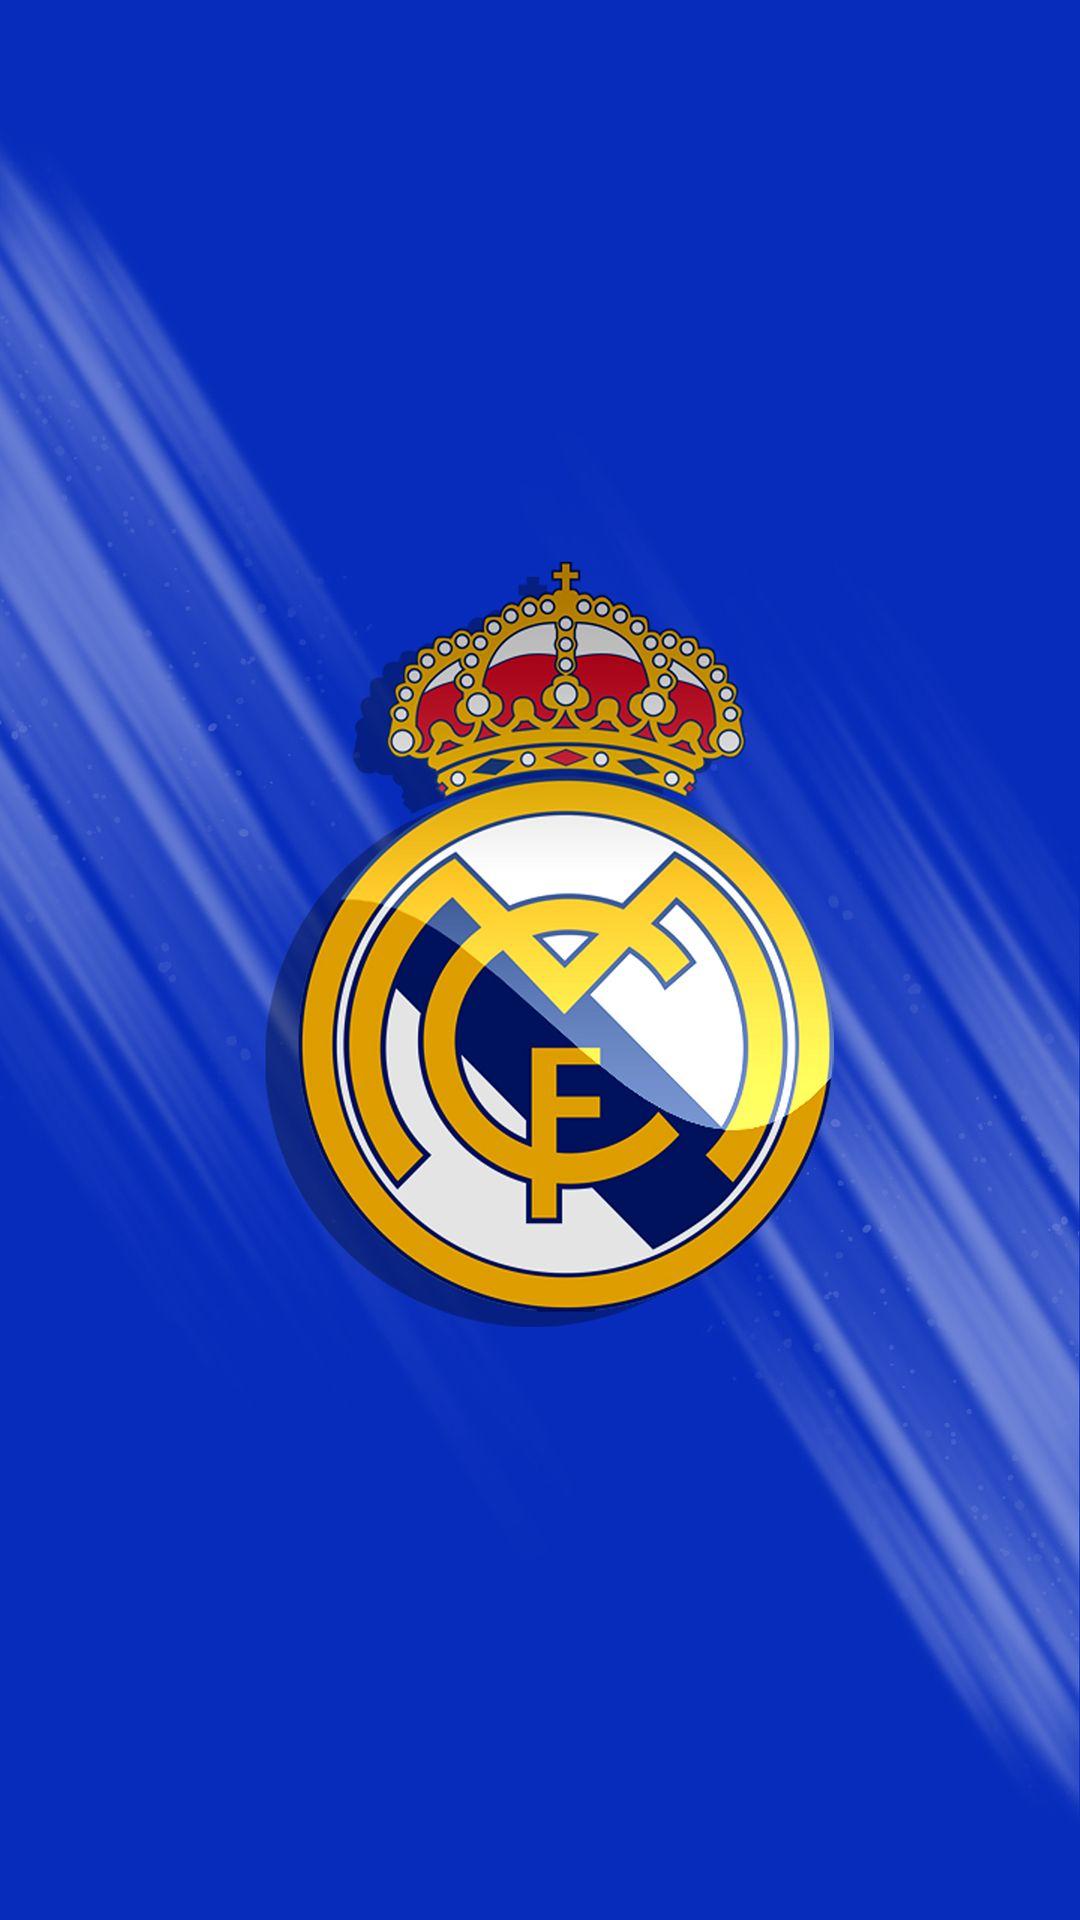 Real Madrid Wallpaper For iPhone iPhone 7 Plus, iPhone 6 Plus